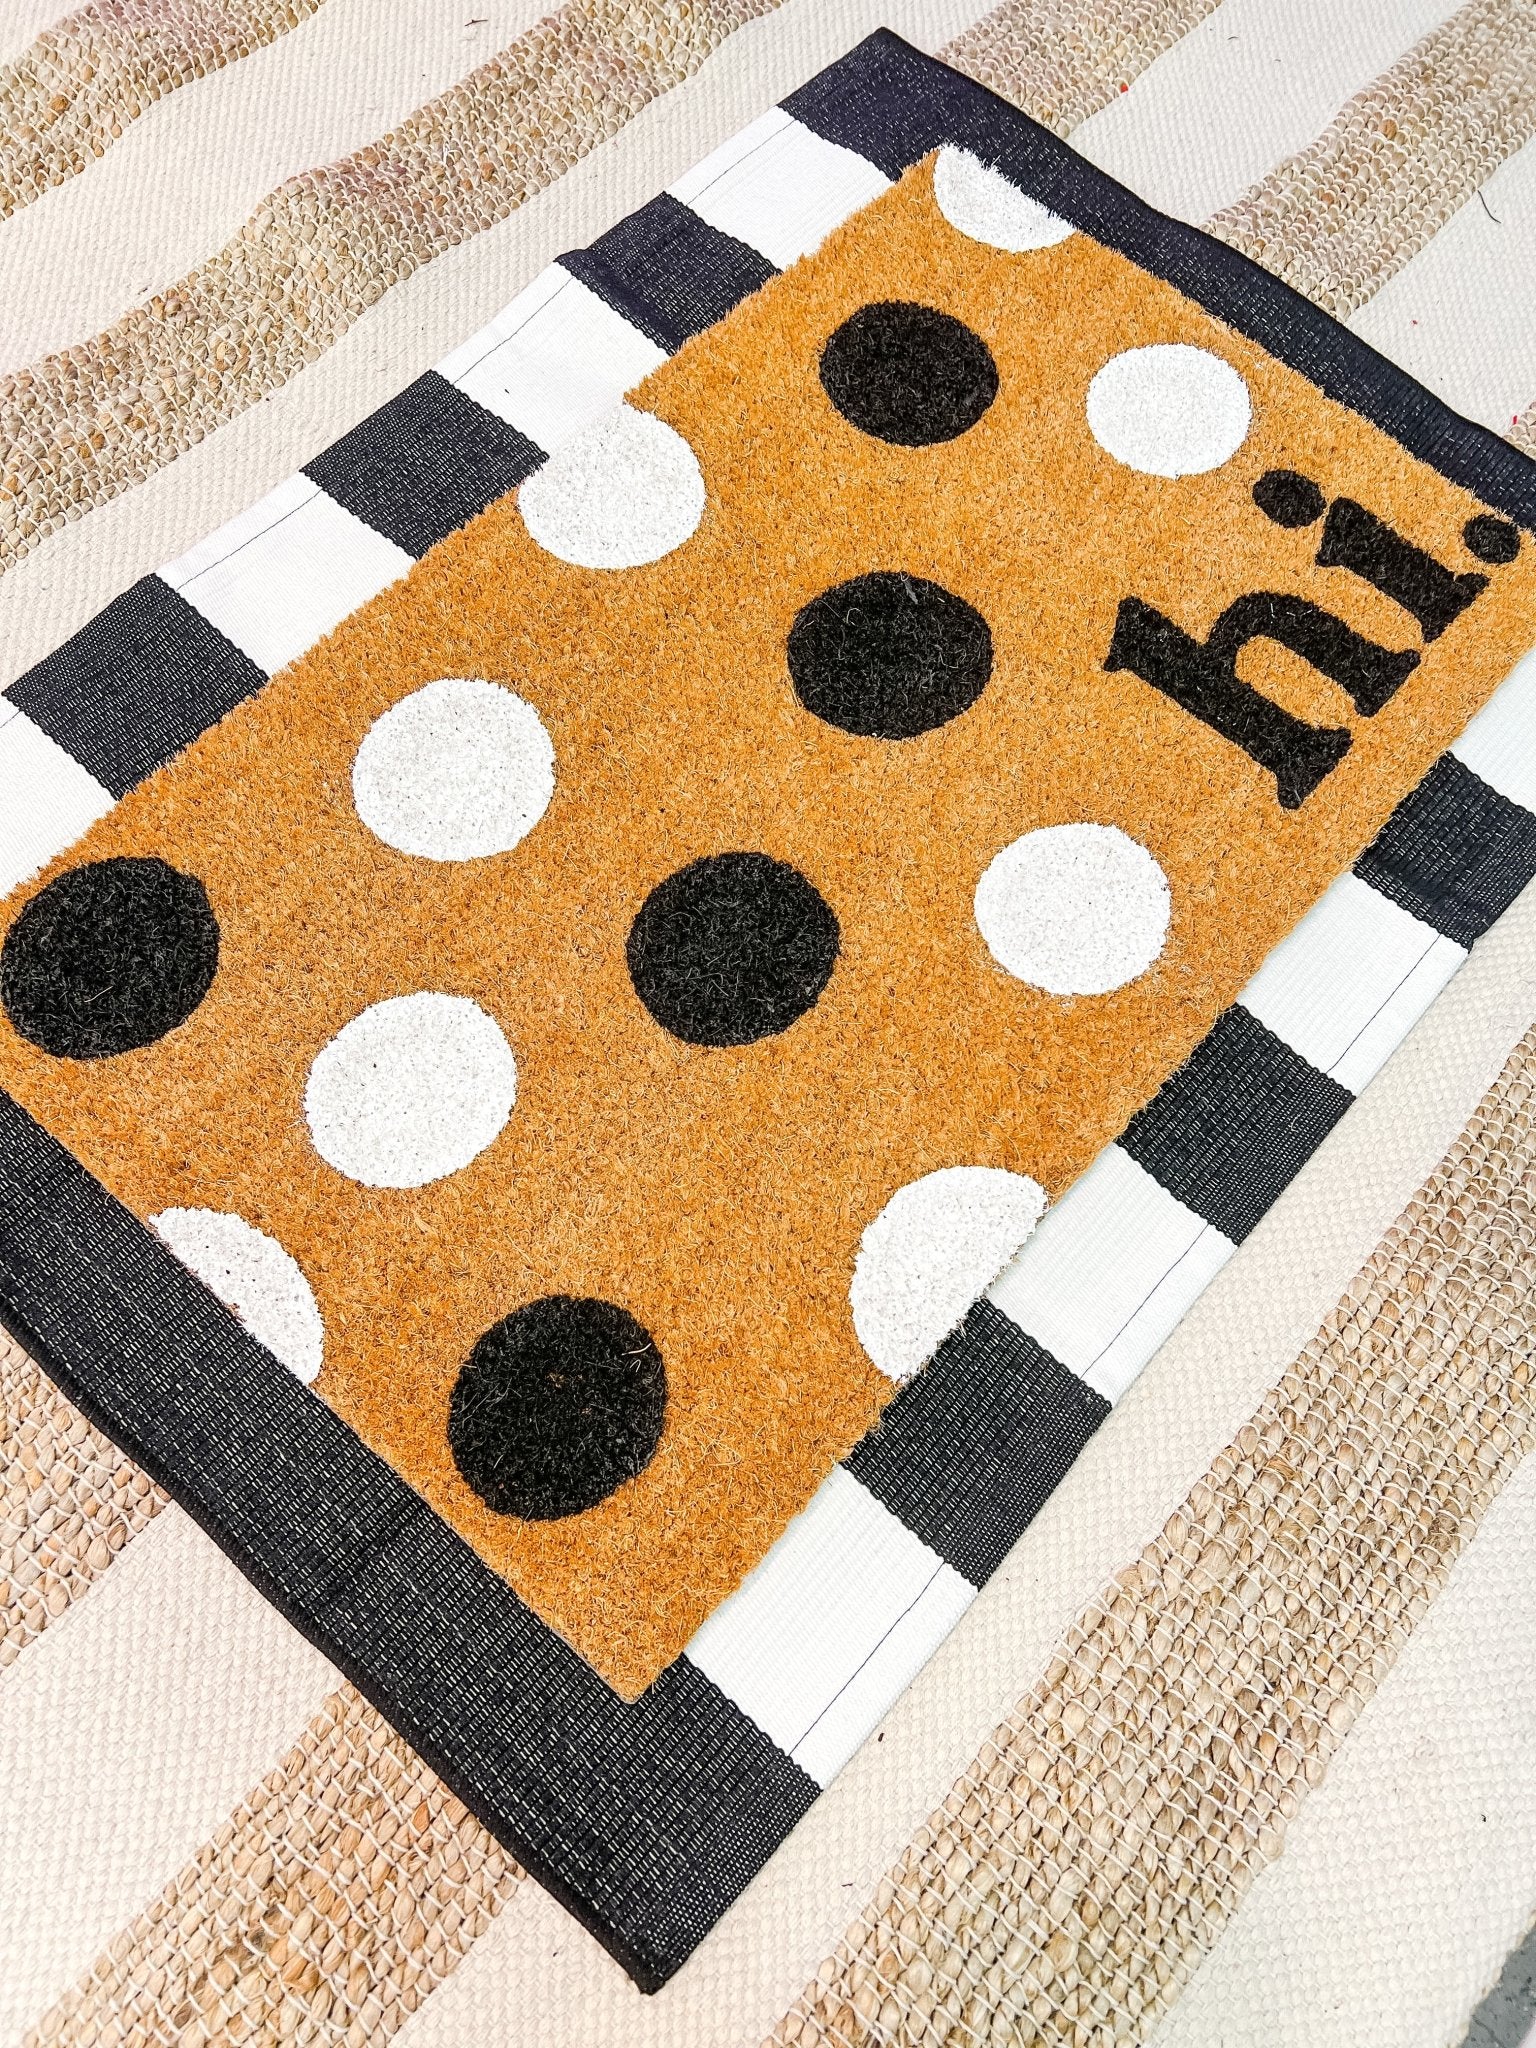 Black and White Striped Rug / Doormat Layering Rug / Small Accent Rug /  Boho Area Rug / Layered Doormat / Modern Doormat / Outdoor Entry Rug 